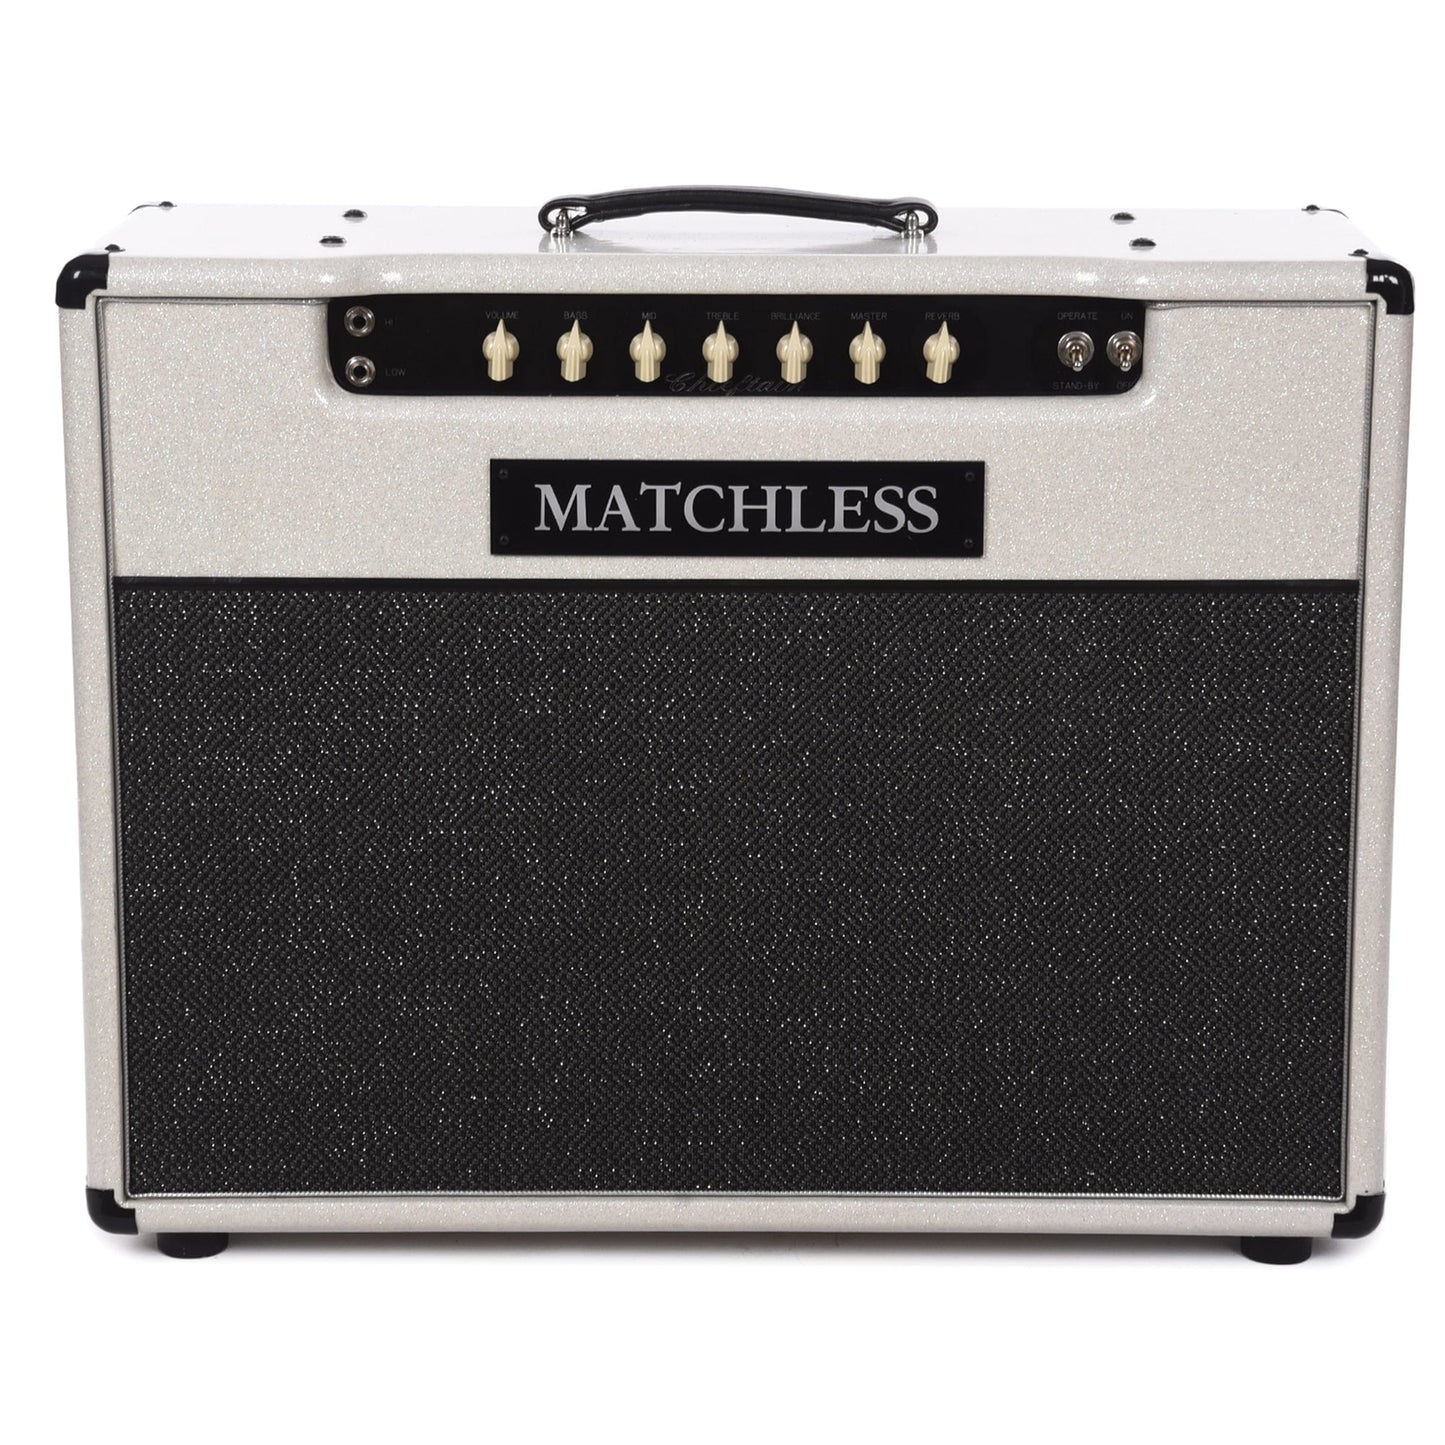 Matchless Chieftan Reverb 40W 2x12" Combo Sparkle Cream w/ Silver Grill Amps / Guitar Combos